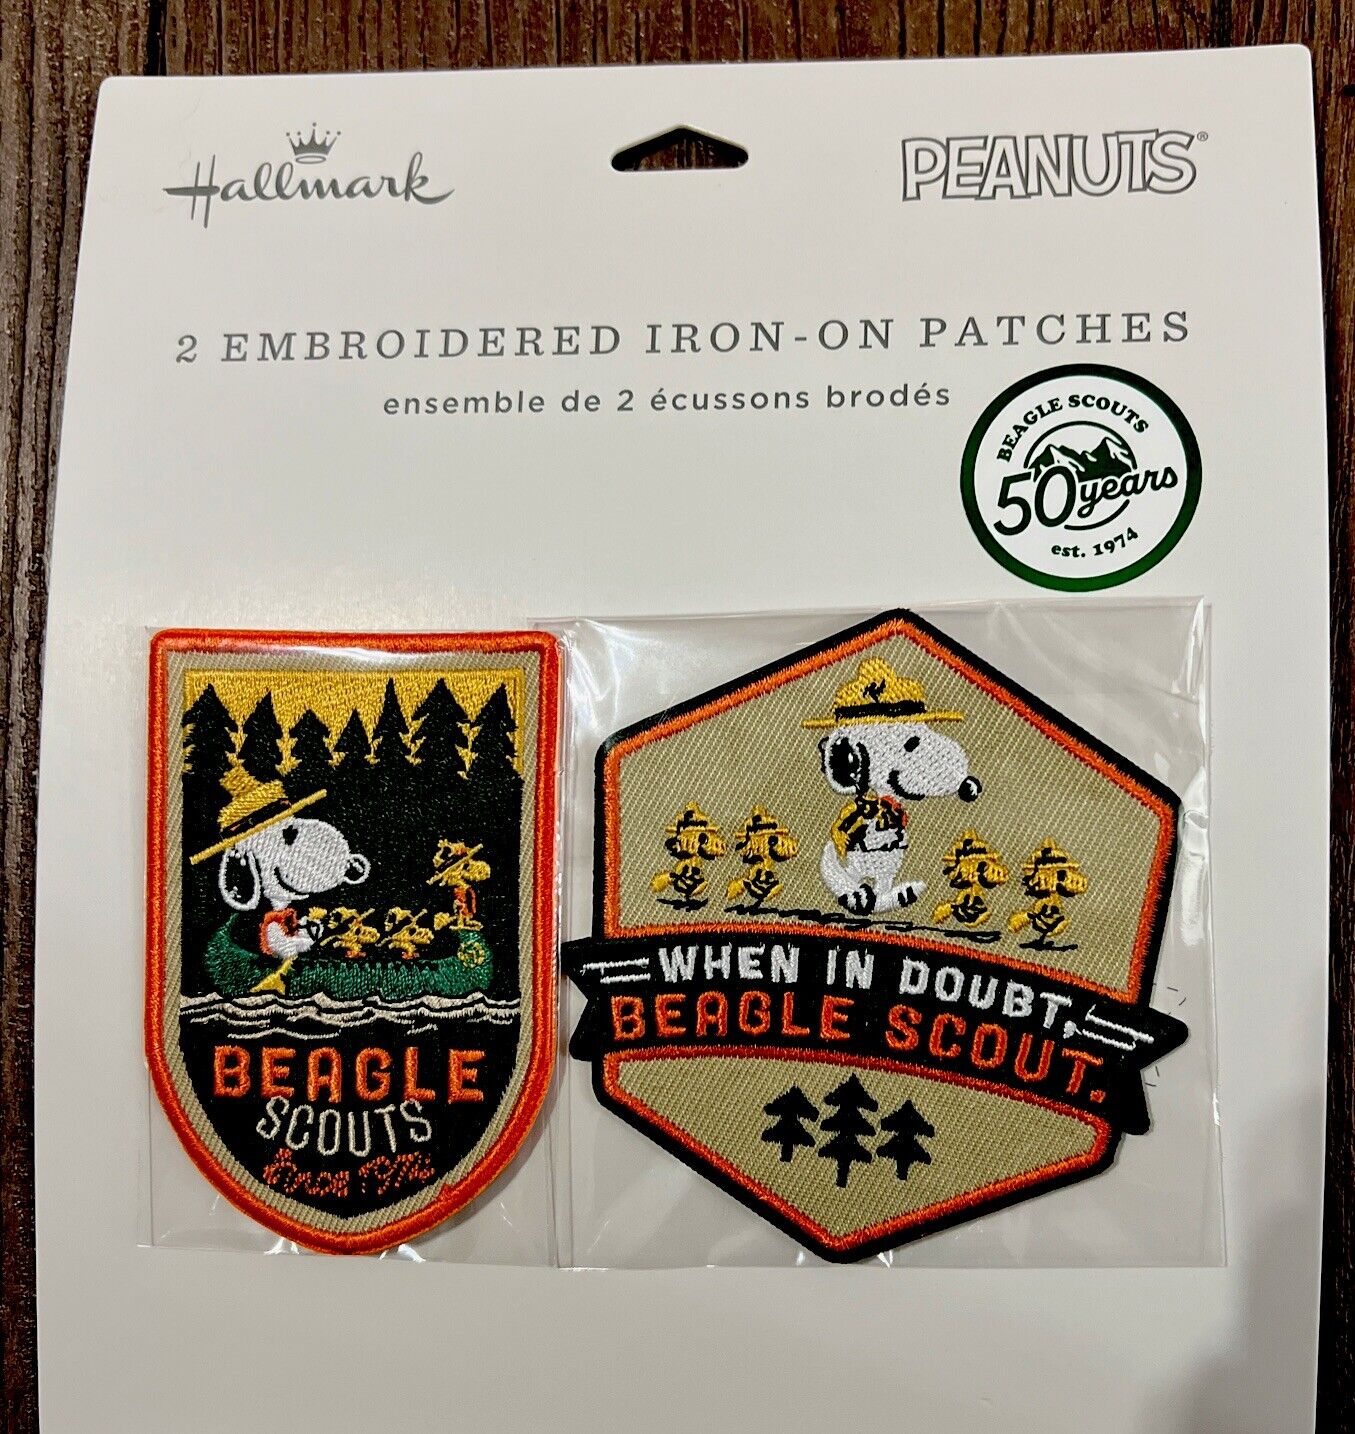 2024 Hallmark TWO EMBROIDERED IRON-ON PATCHES Peanuts Snoopy Beagle Scout 50 YR